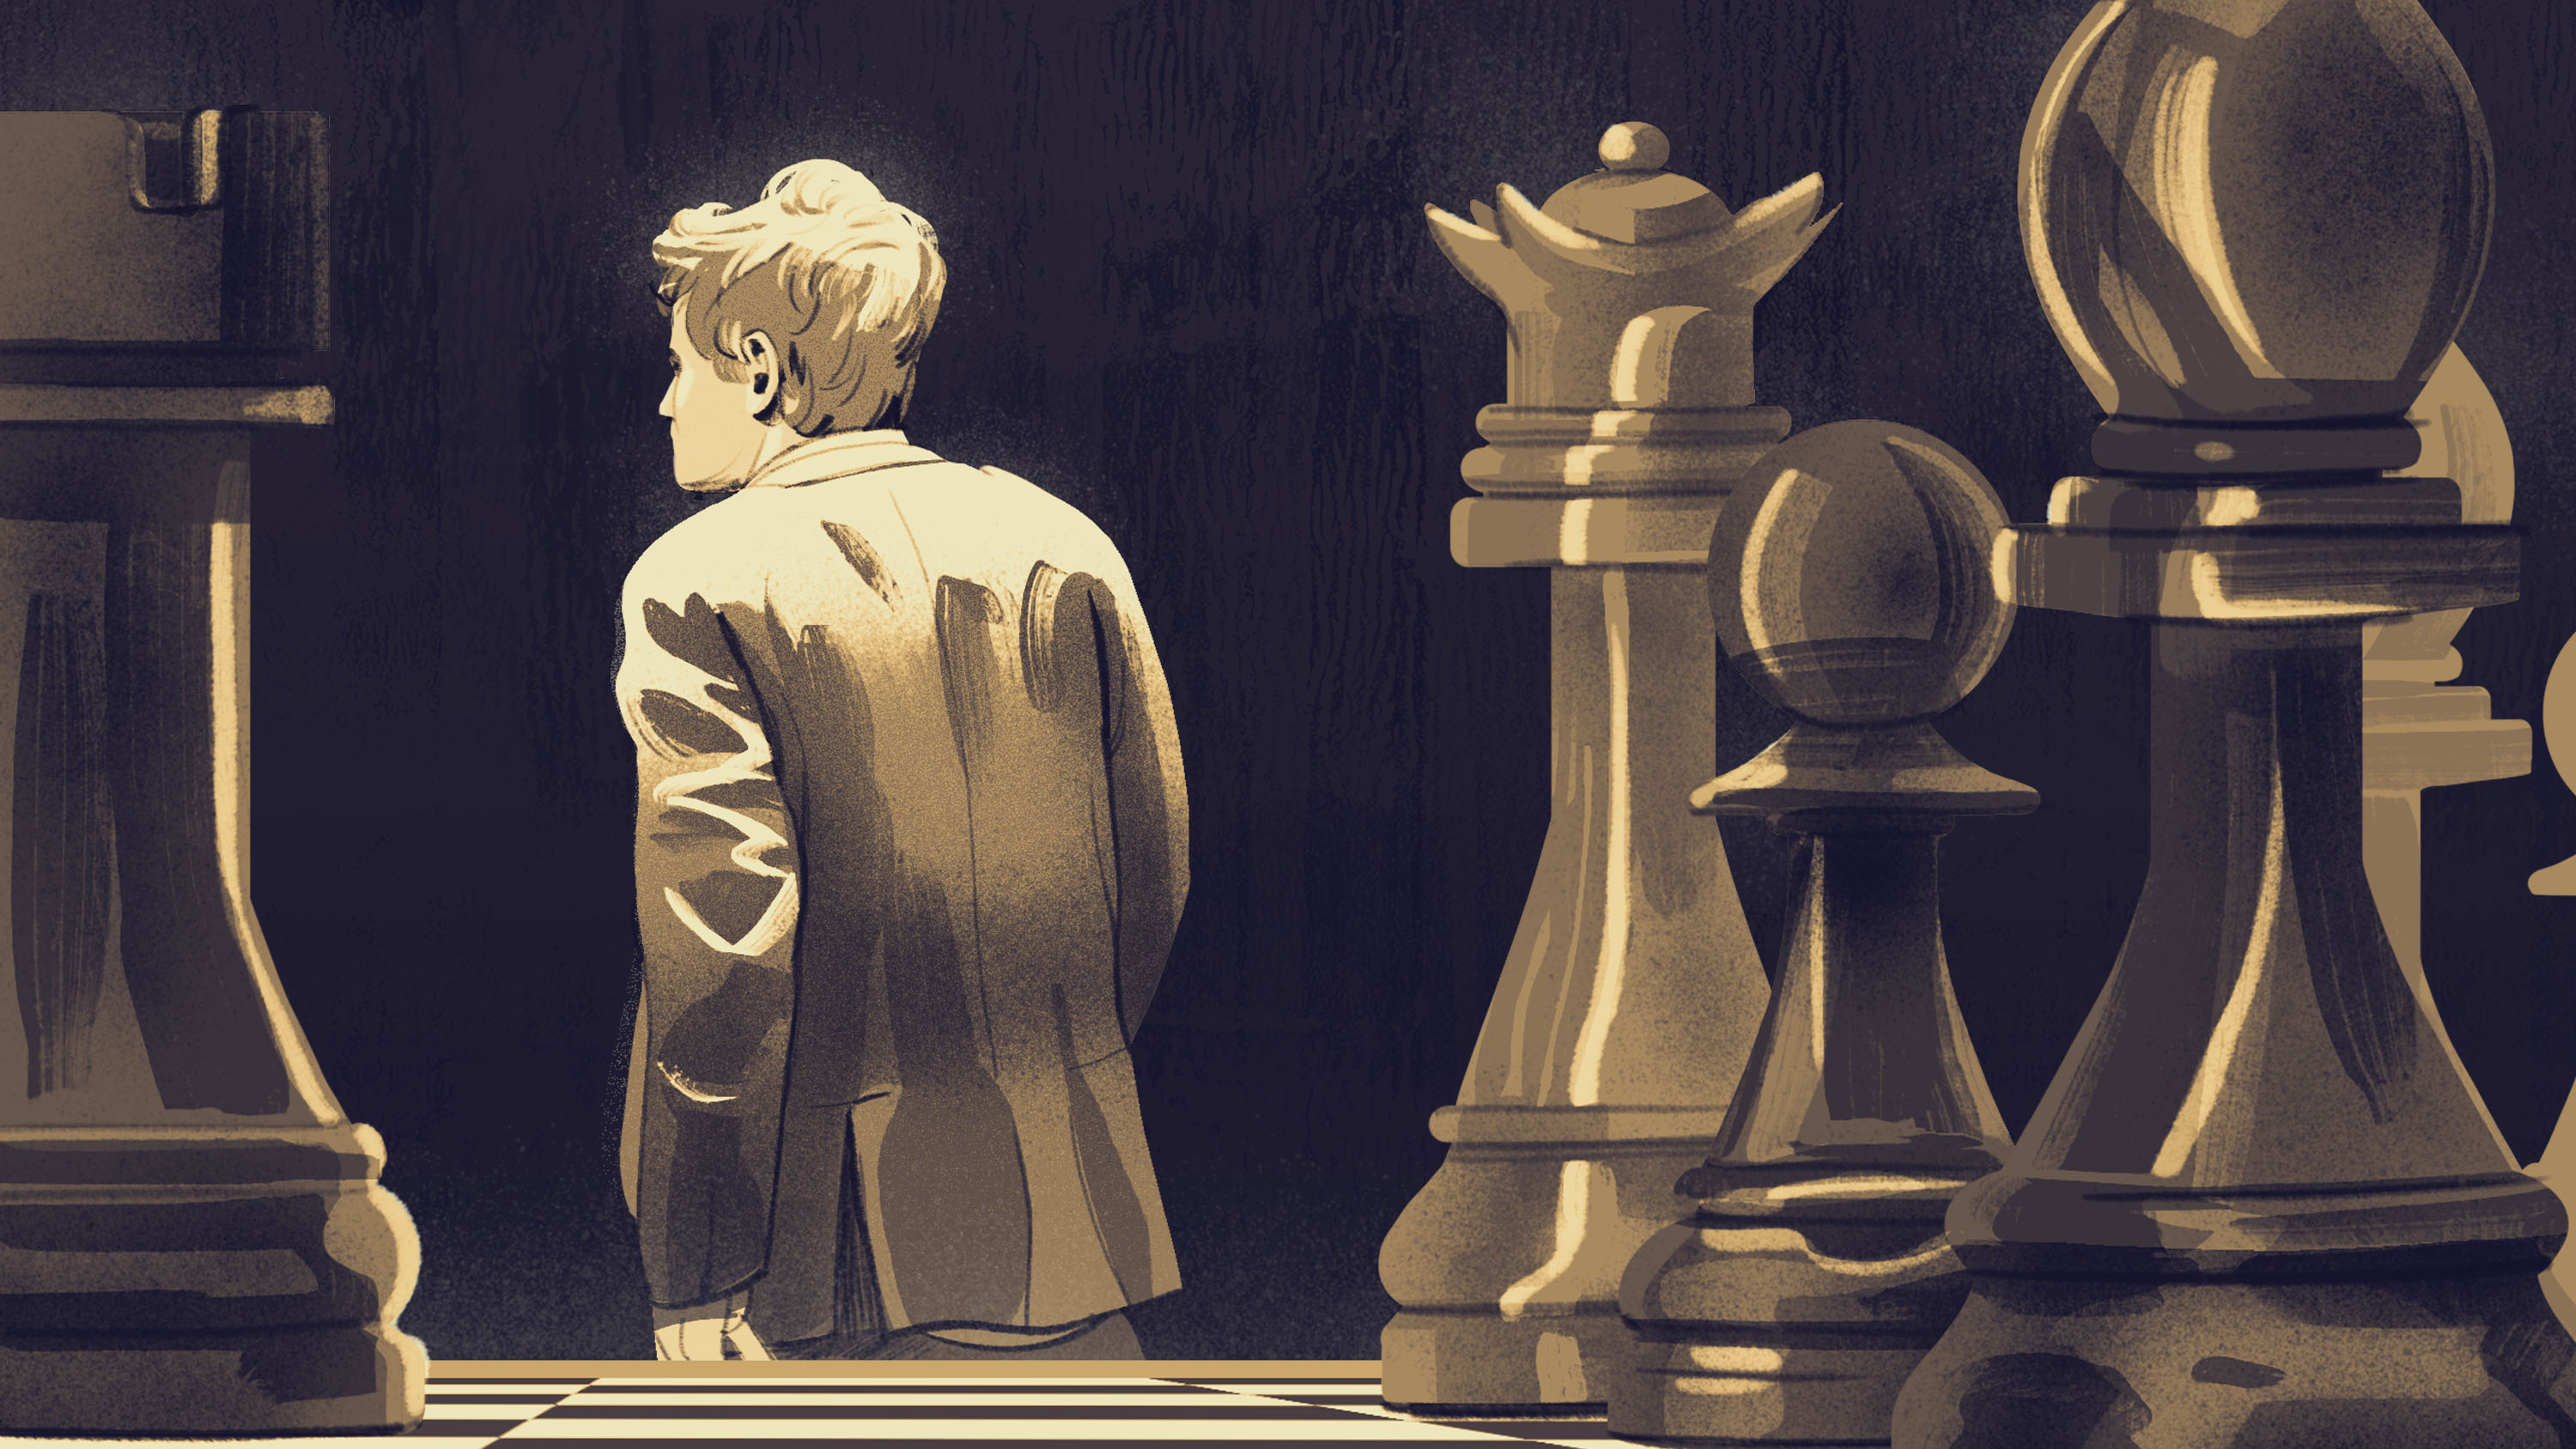 Magnus Carlsen: How the World's Best Chess Player Lost His Motivation